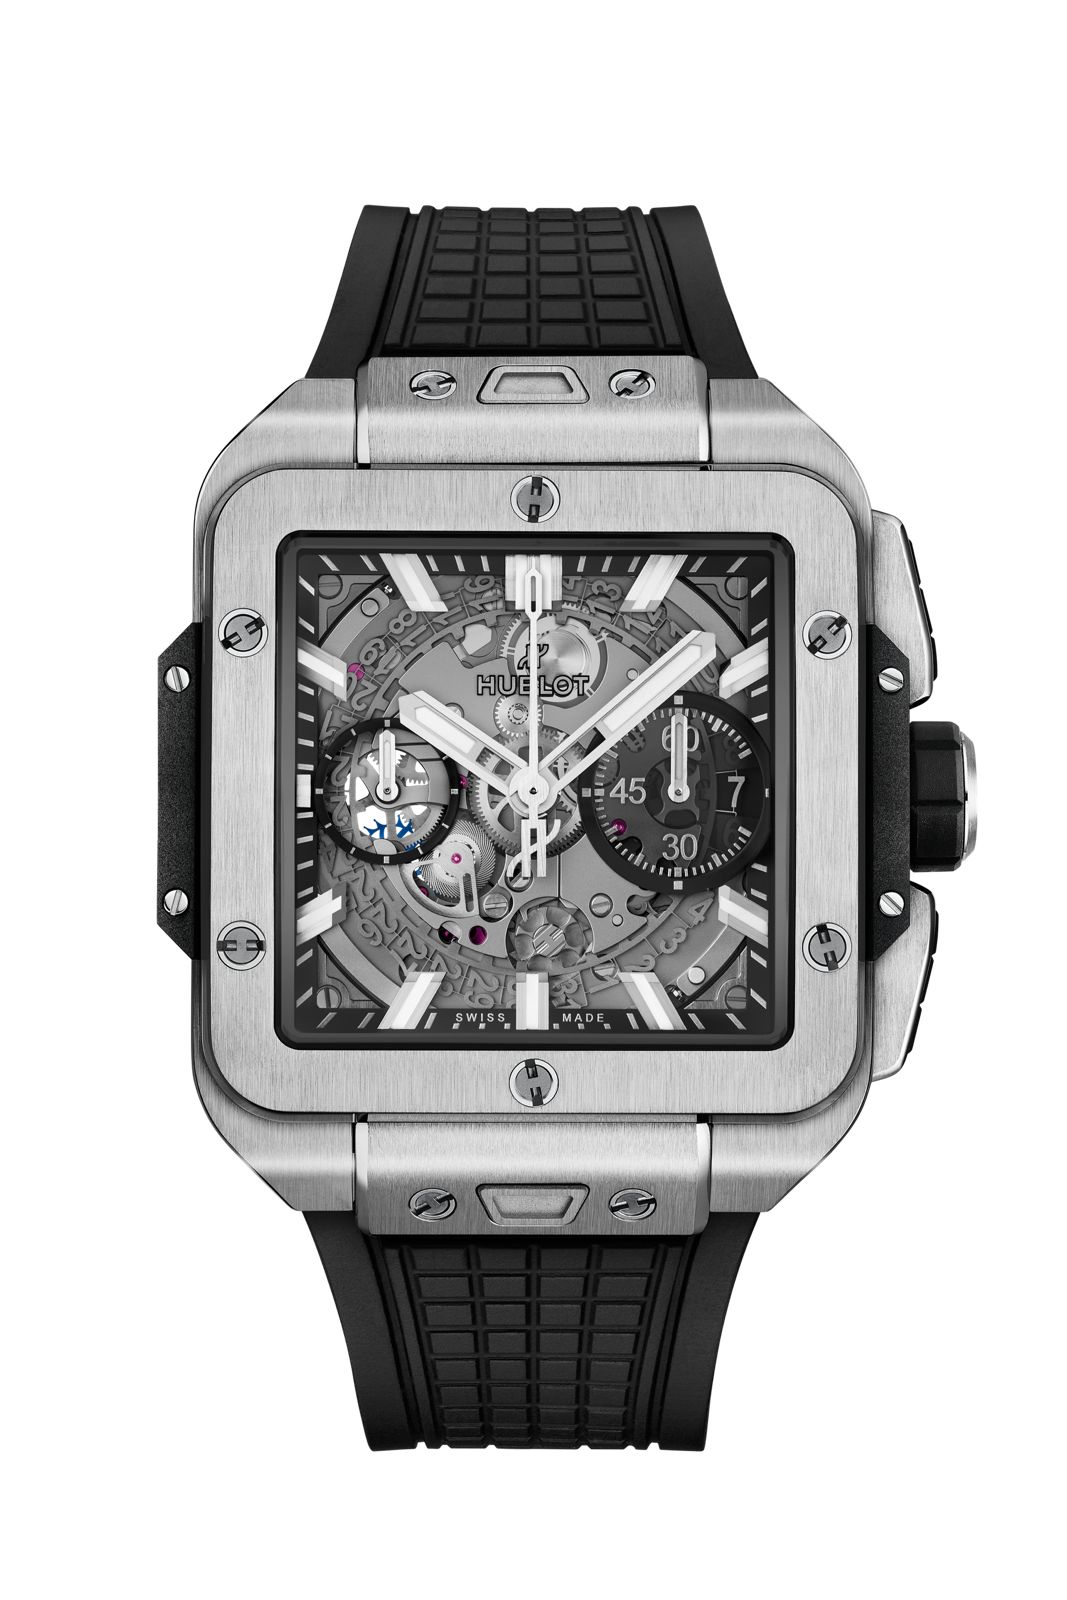 Hublot Gents Watch Date working Powar Lock Different color available